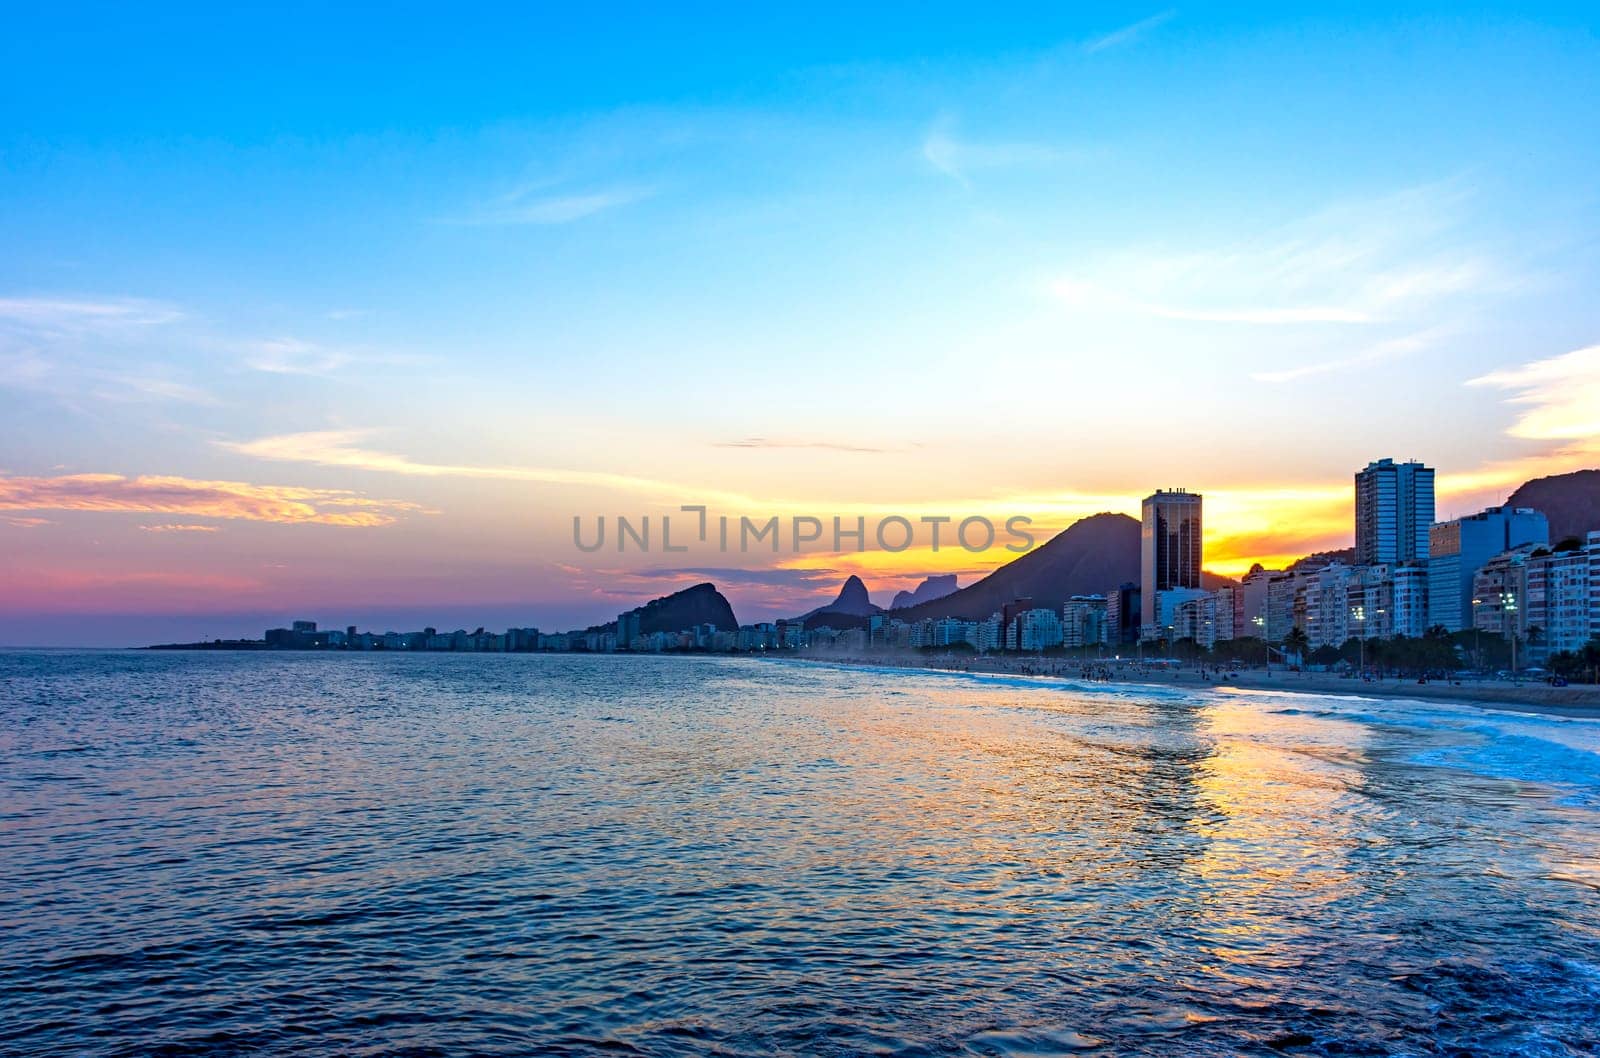 Copacabana beach sunset in Rio de Janeiro with the light coming from behind the buildings and hills